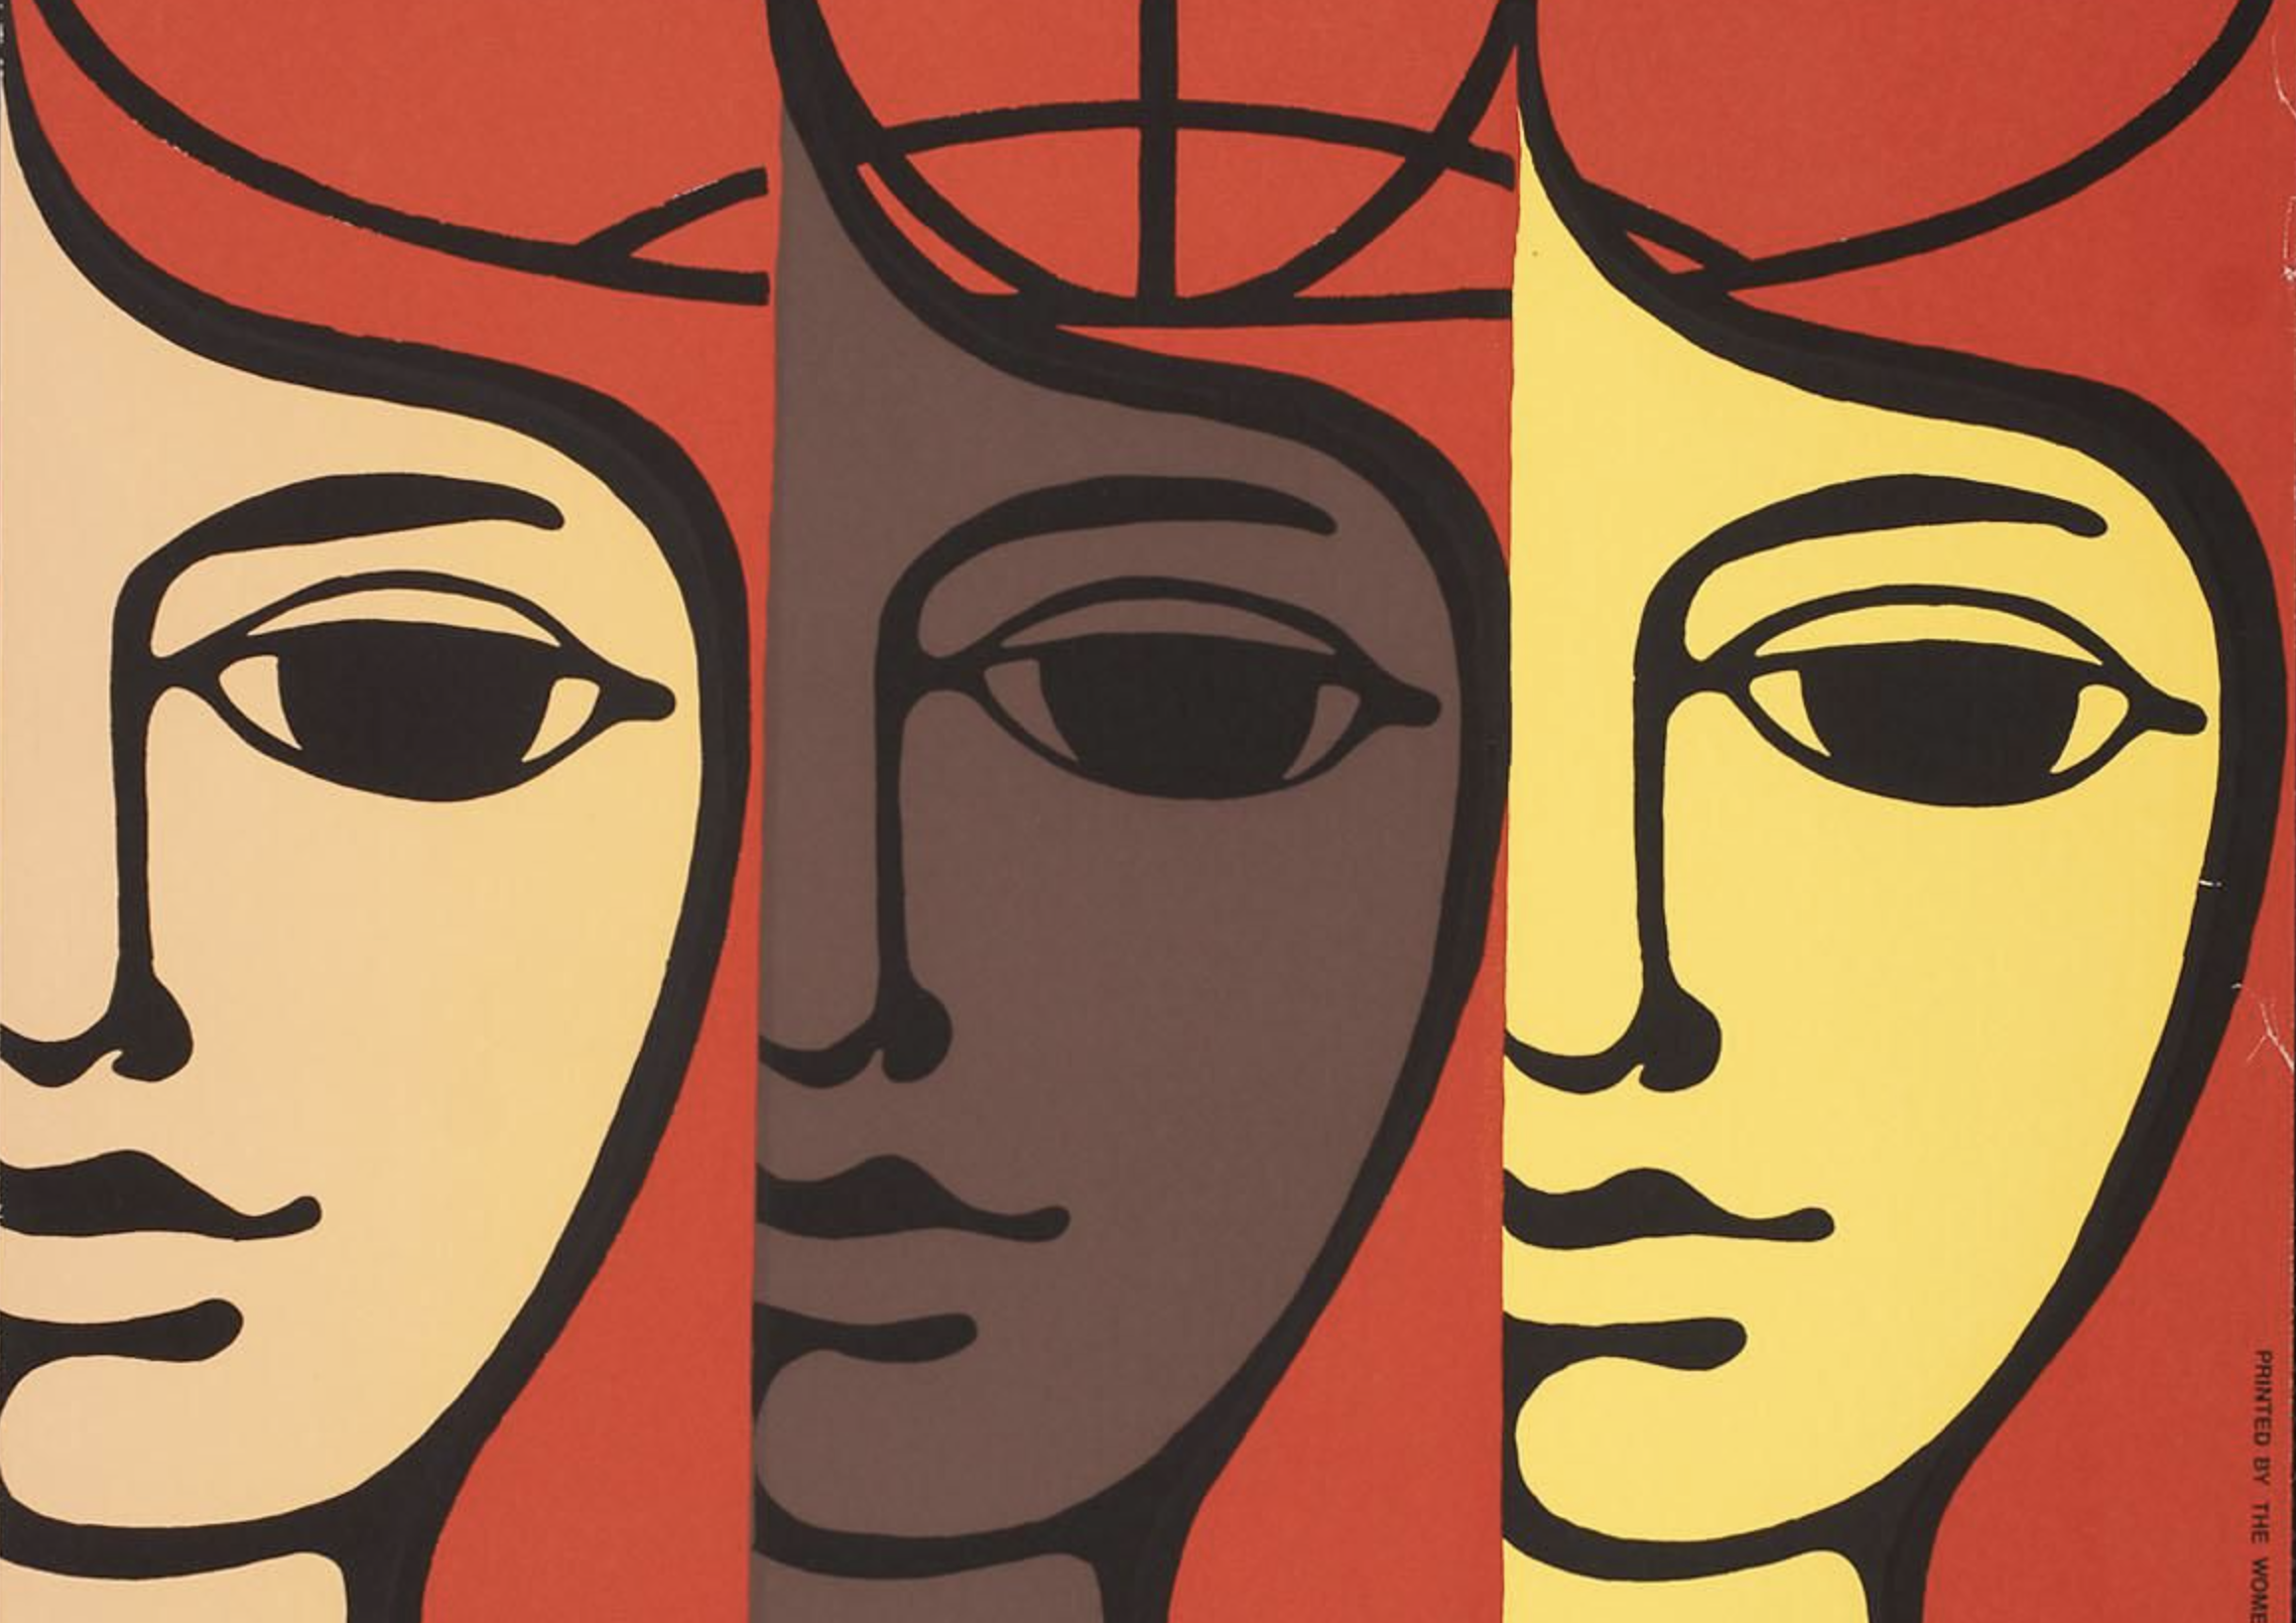 A blocky screenprint of three women's faces. The faces are shown as halves, and all three are identical except for their differing skin tones. The background of the image is red and there is an outline of a globe above their faces.